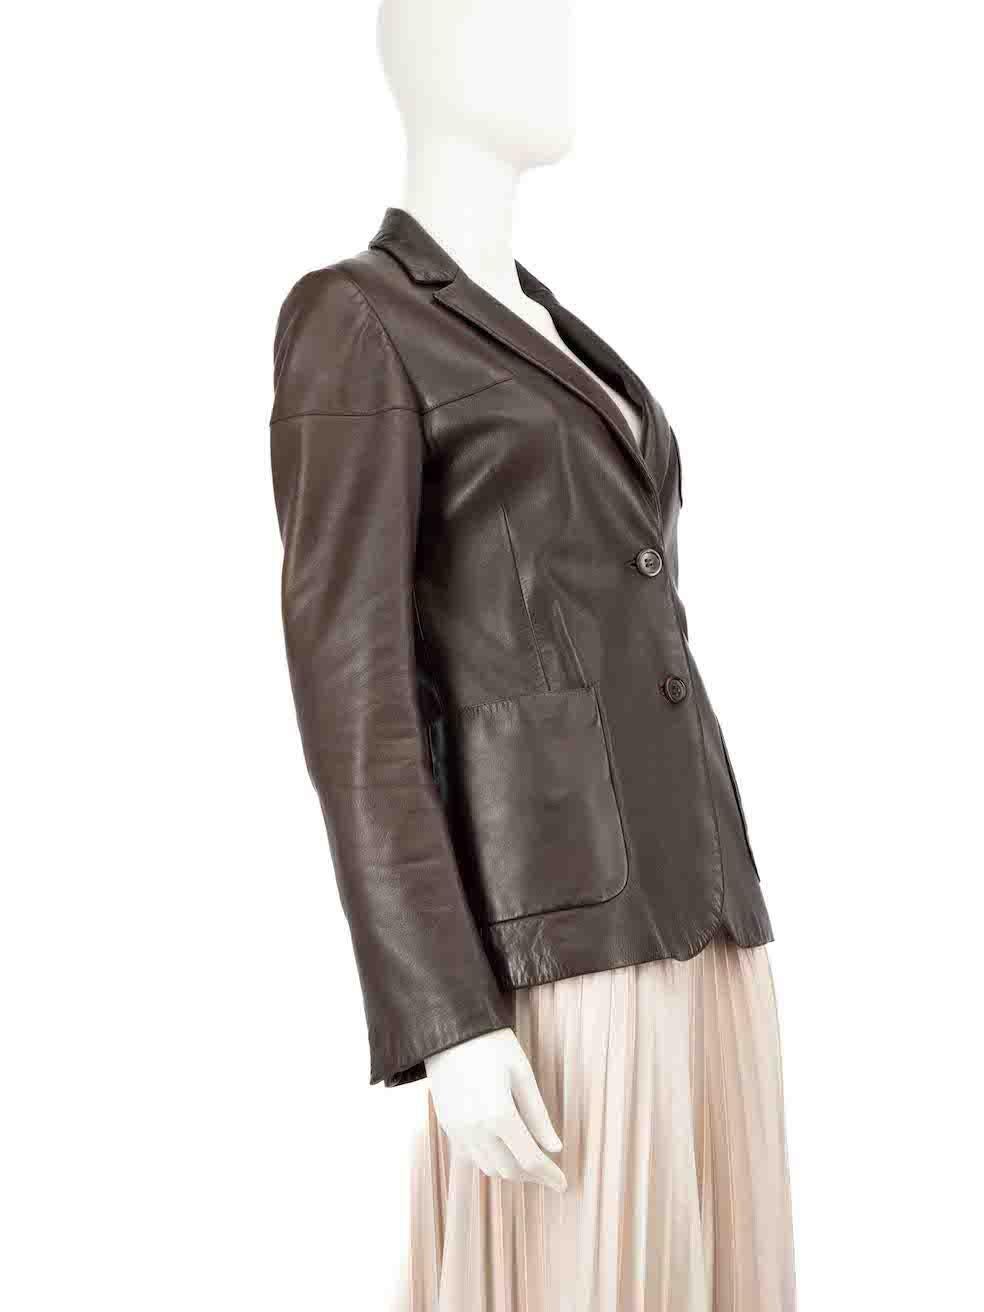 CONDITION is Very good. Minimal wear to the blazer is evident. Minimal wear to the collar, underarm, above the hemline and sleeve ends is seen with general creasing to the leather on this used Jil Sander designer resale item.
 
 
 
 Details
 
 
